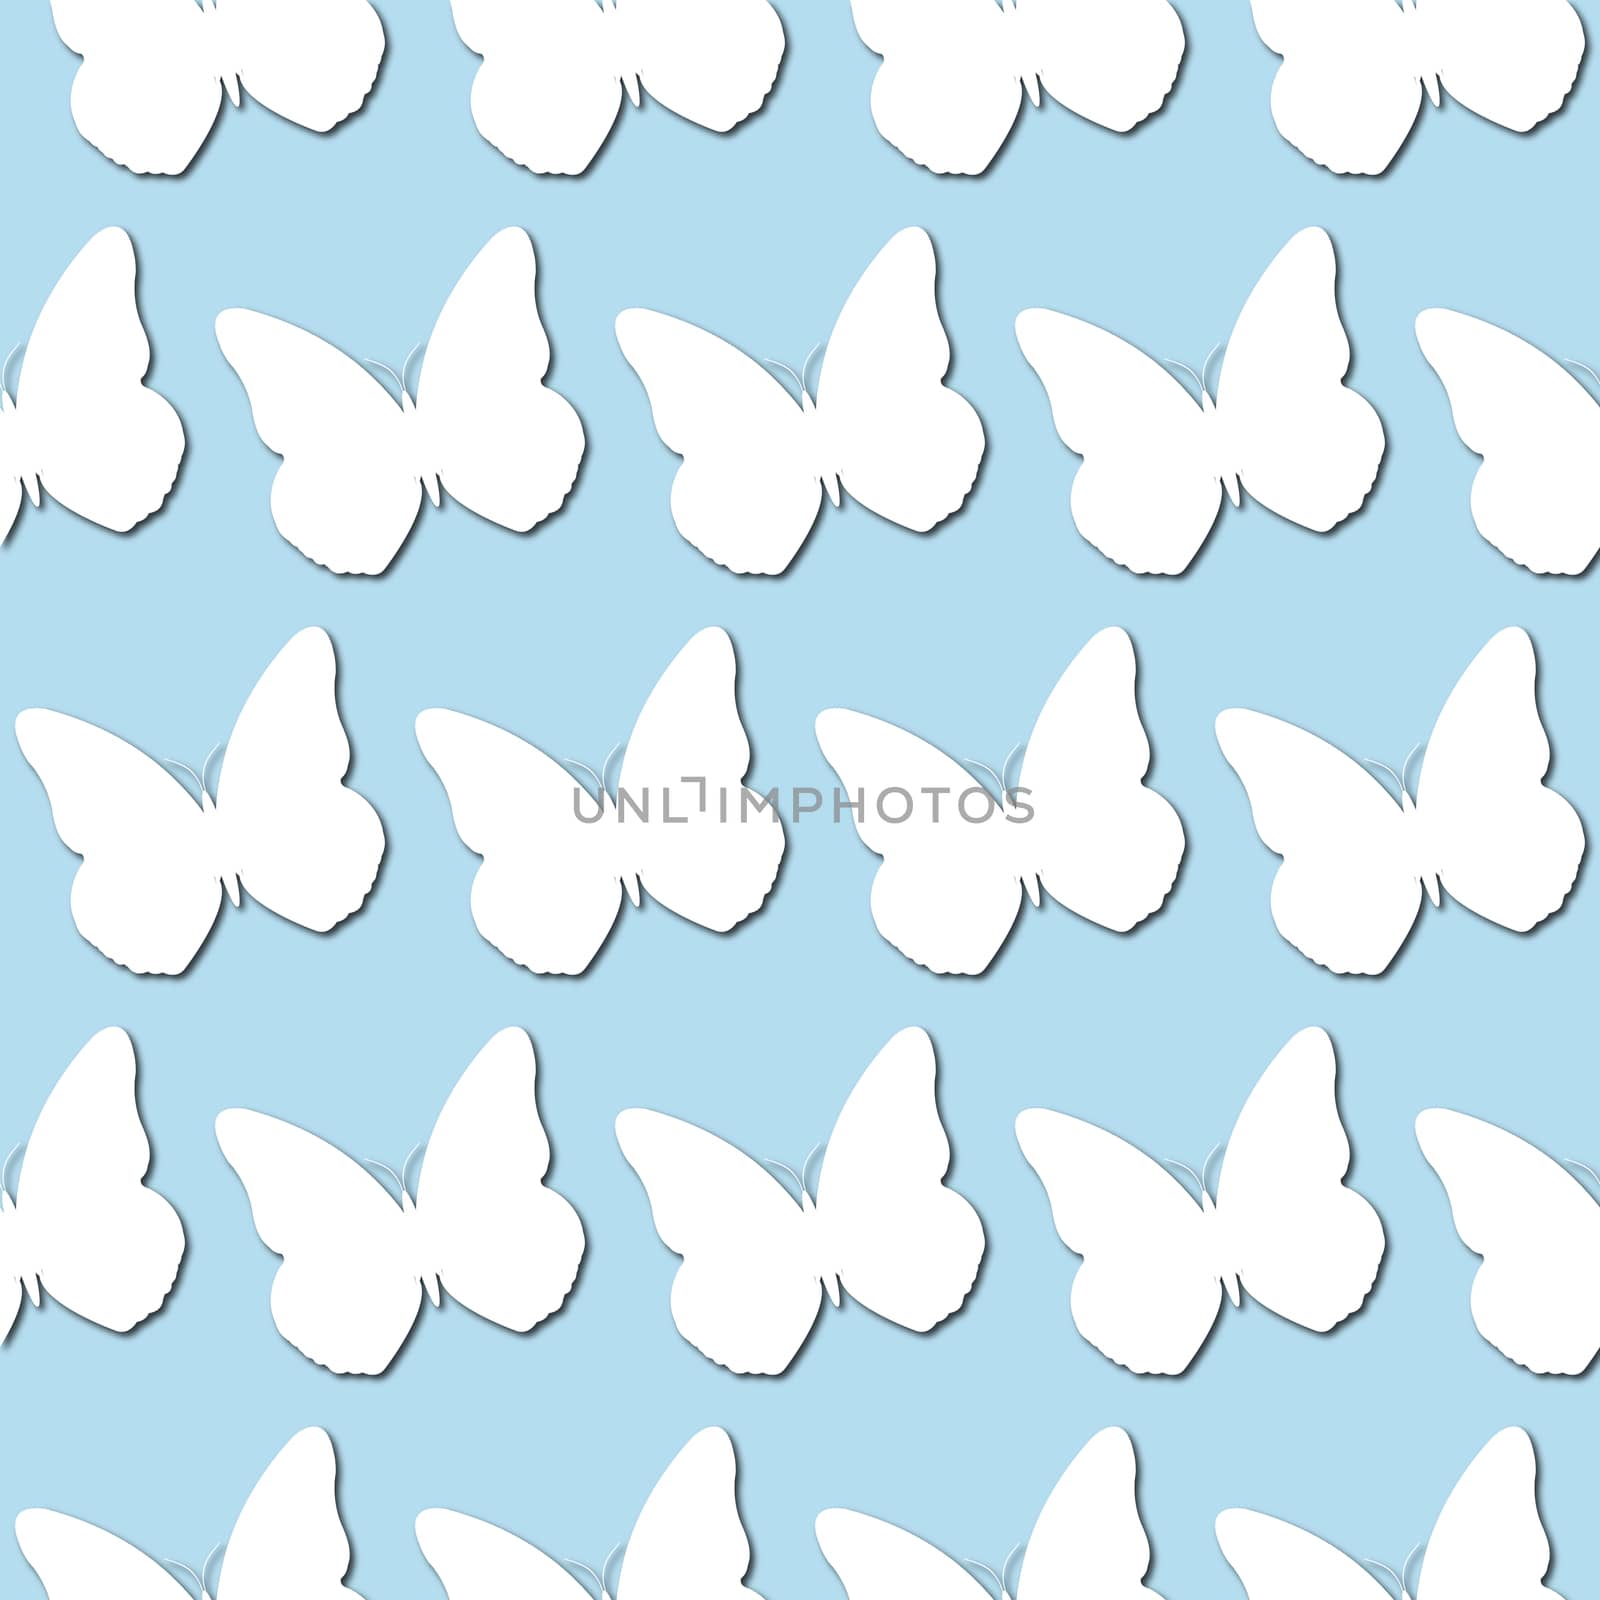 White butterfly silhouette on pale blue background, seamless pattern. Paper cut style by Pashchenko